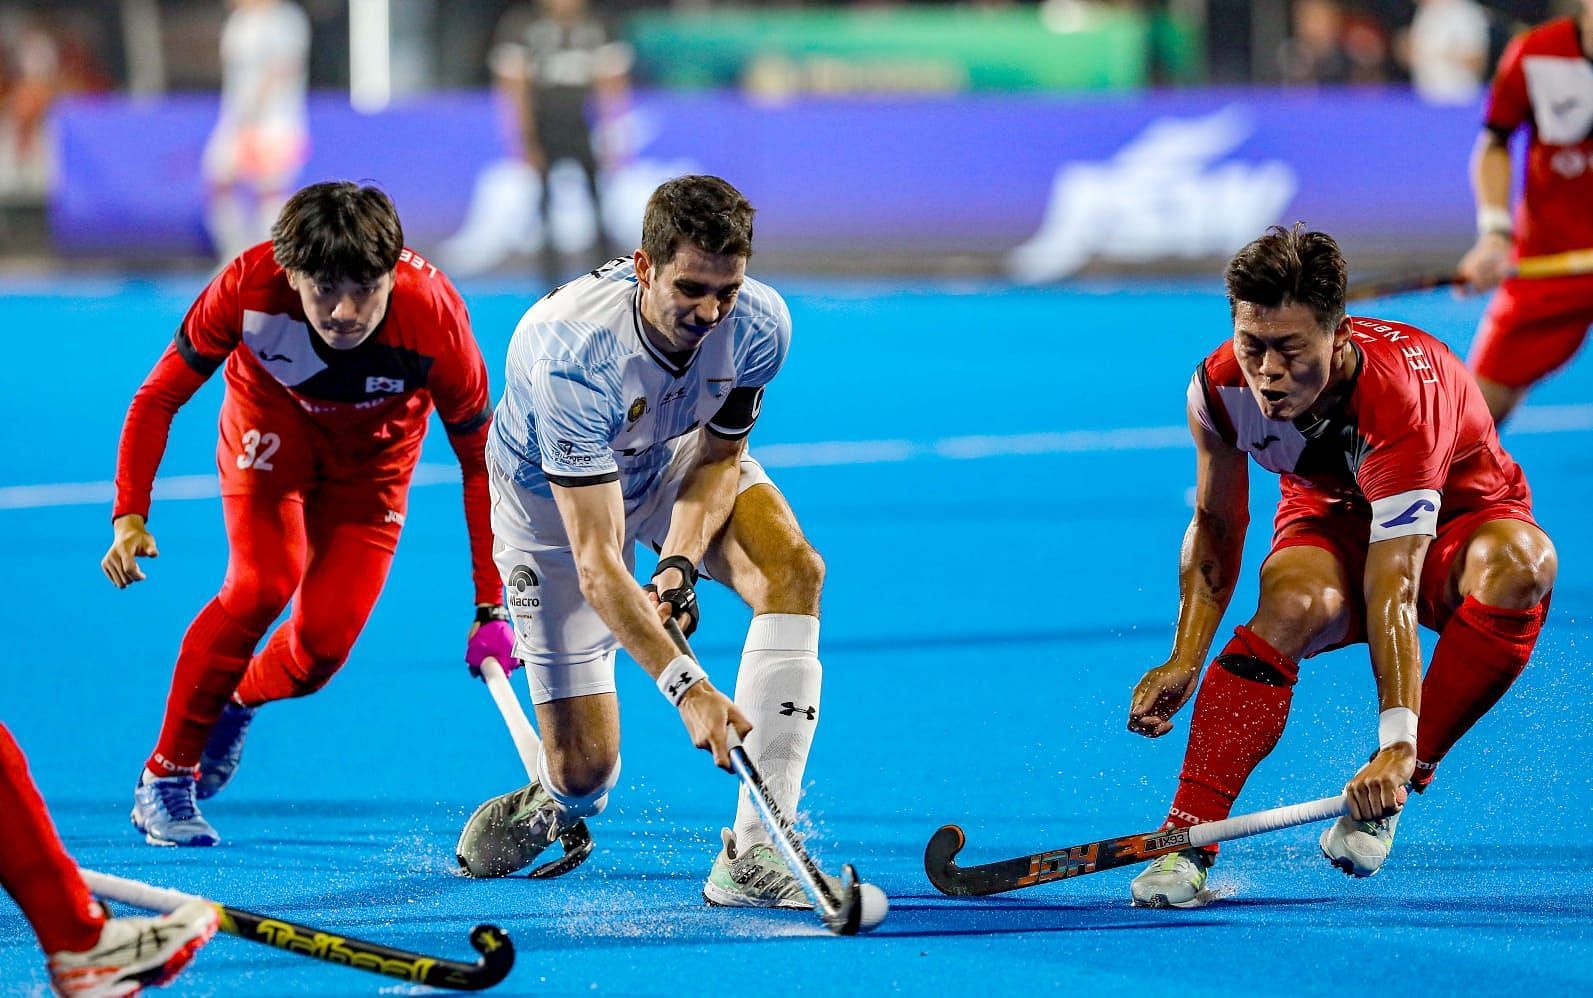 Korea and Argentina teams in action in an earlier match (Image Courtesy: Twitter/Hockey India)